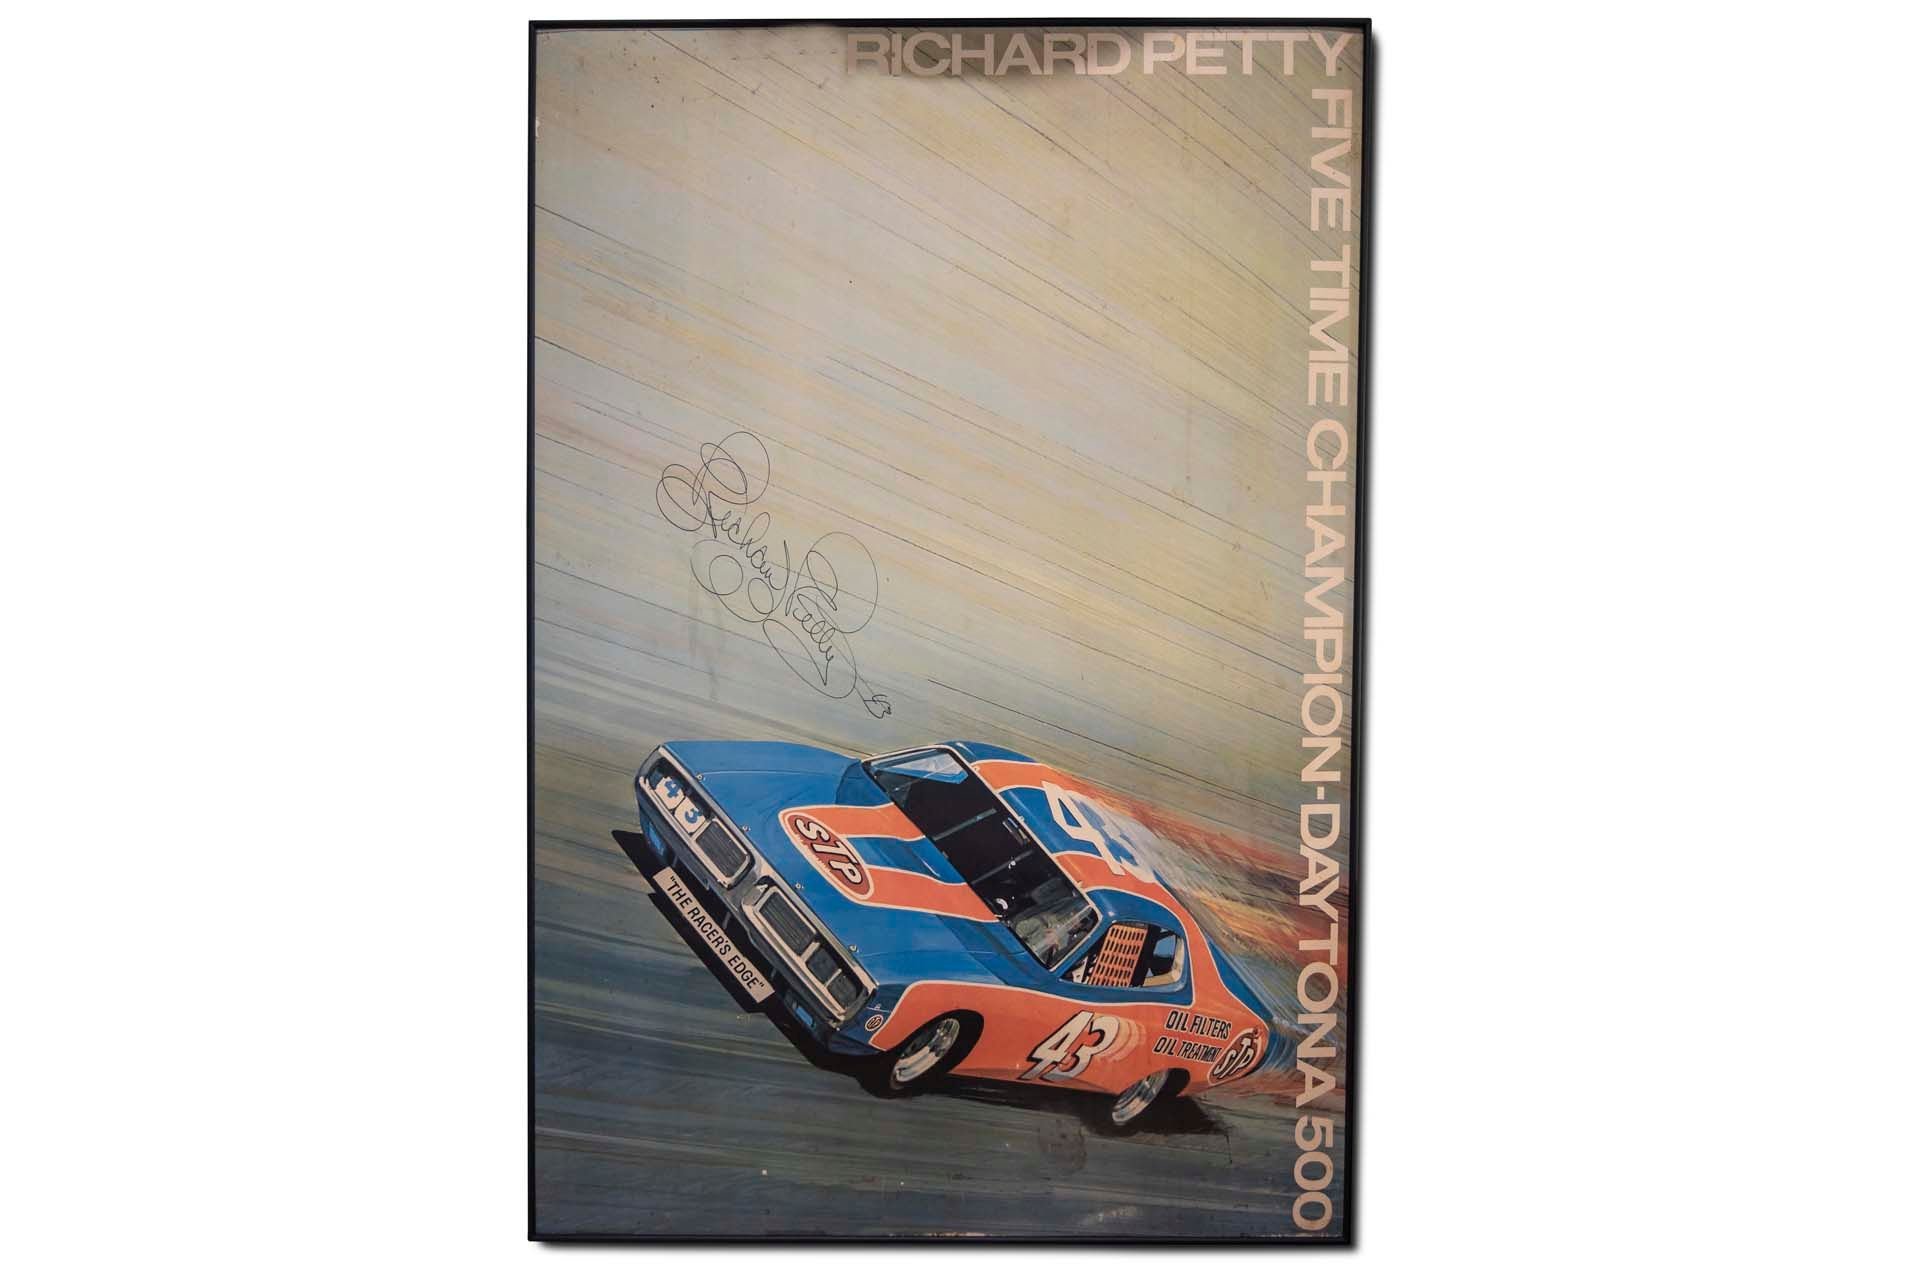 For Sale Framed Richard Petty Tribute Poster, Signed